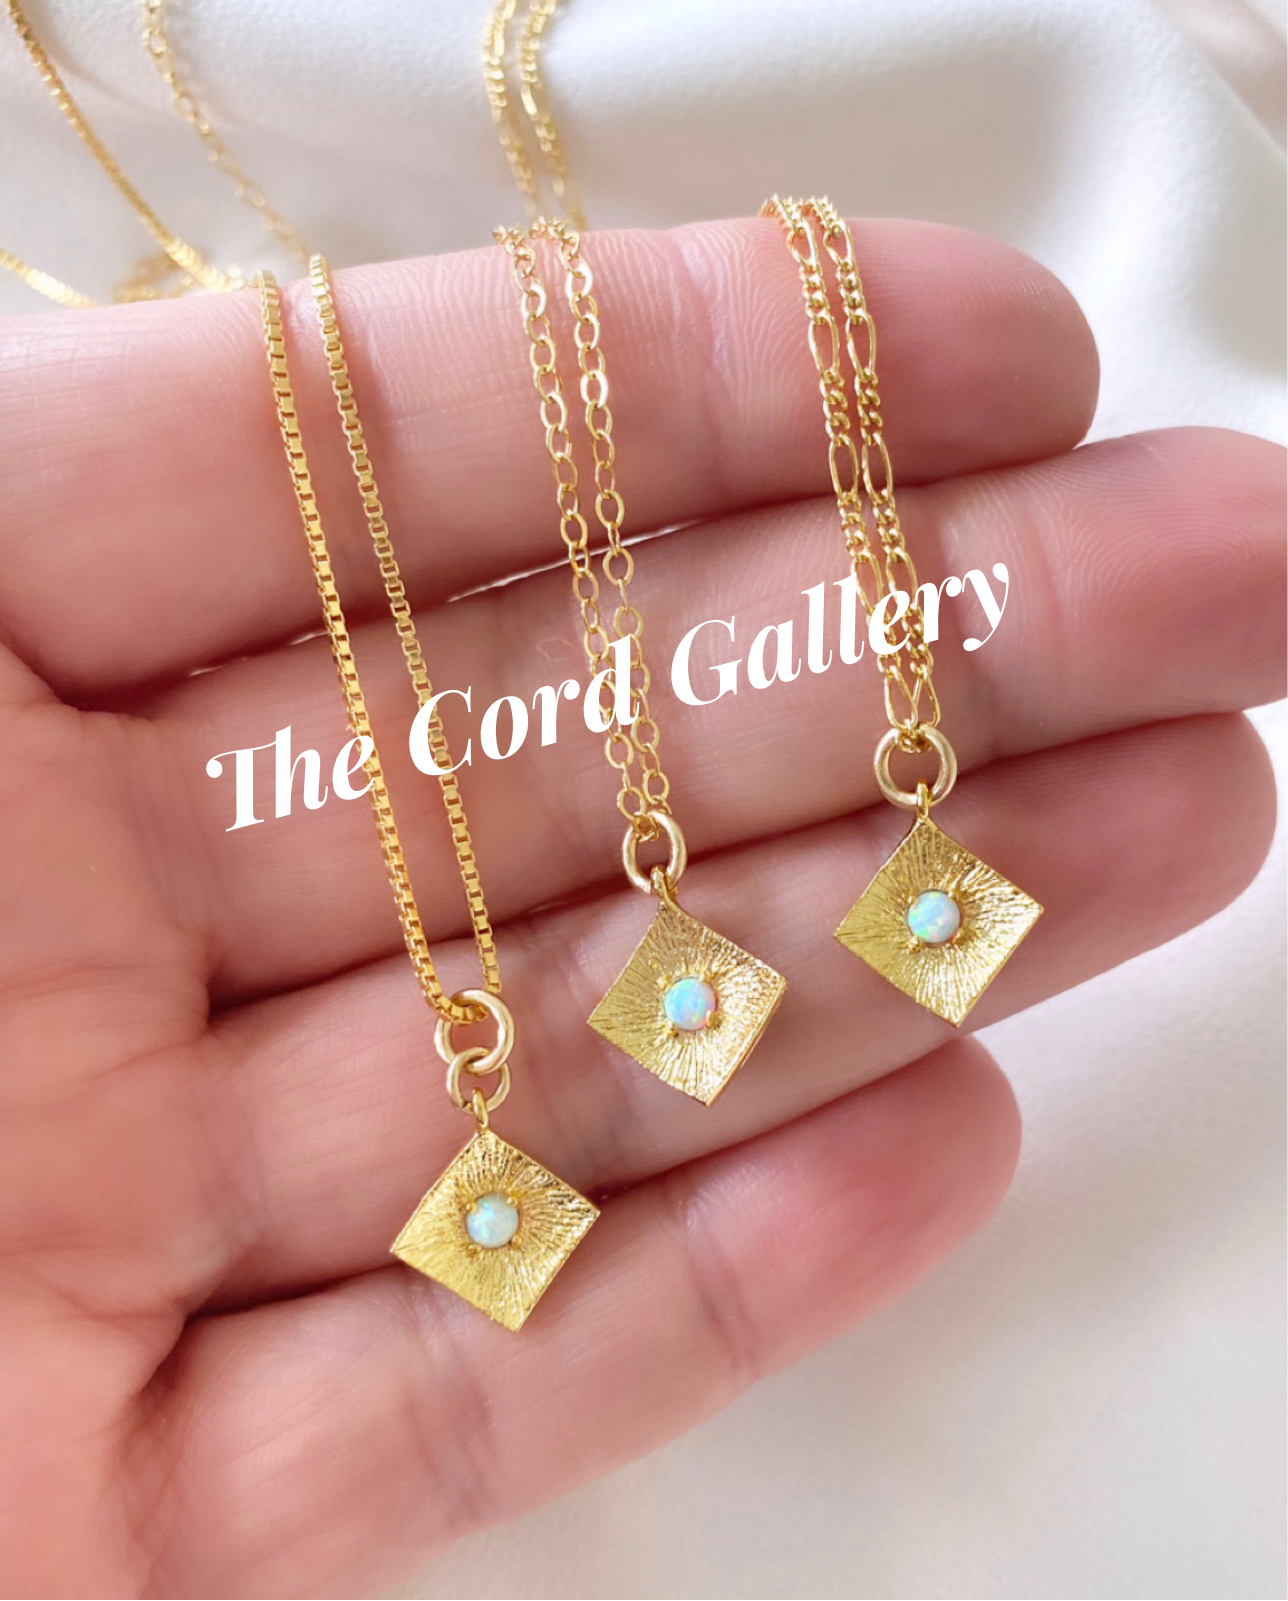 Dainty Opal Square Pendant Necklace Gold Filled Chain